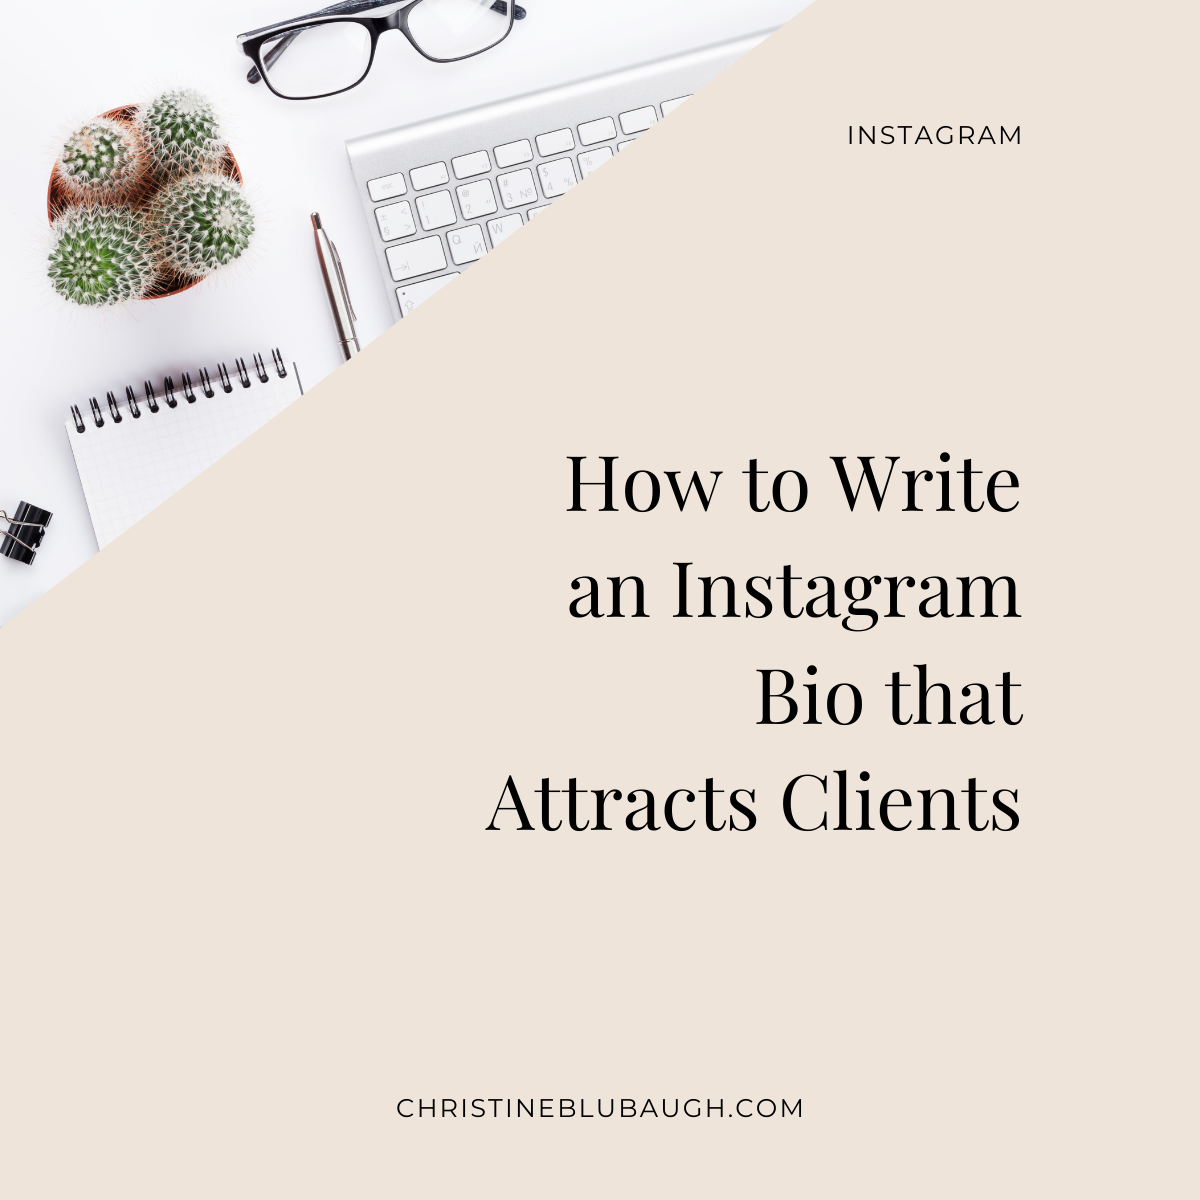 Write an Instagram Bio that Attracts Ideal Clients